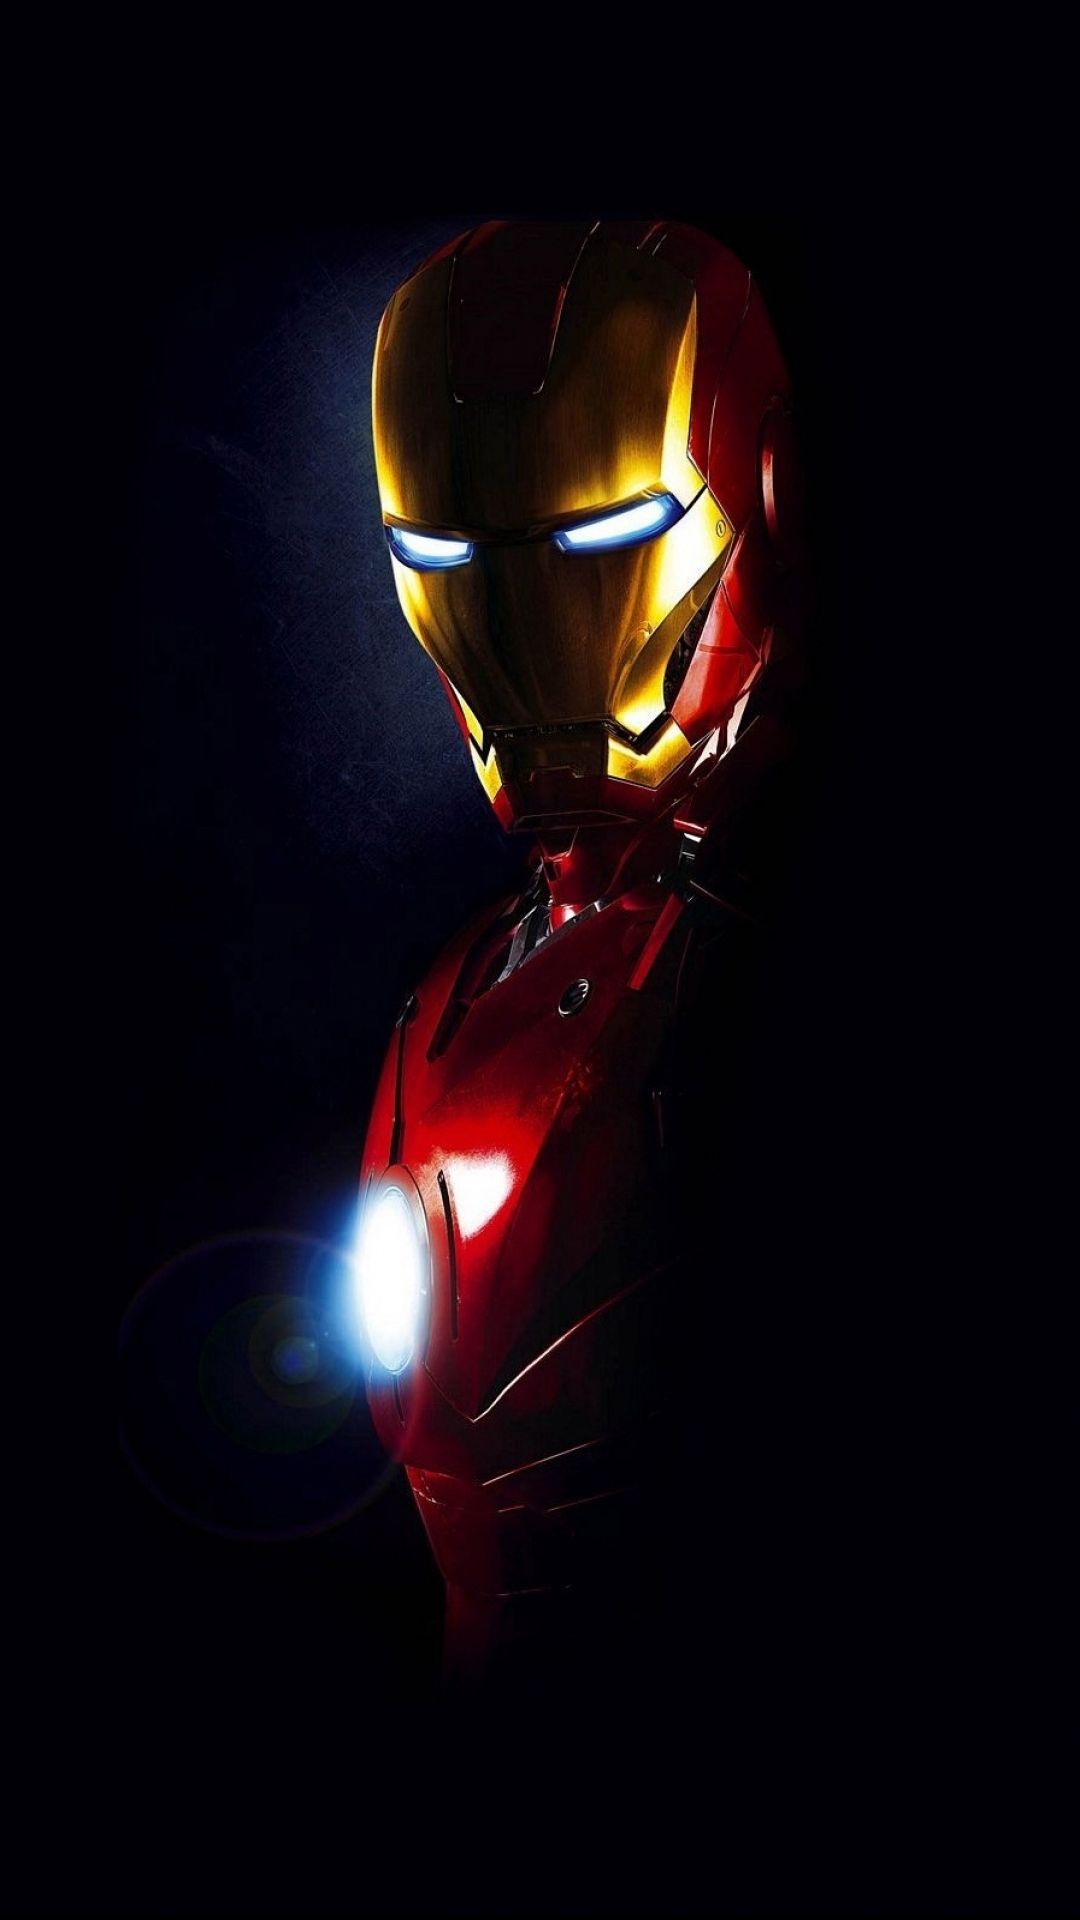 Cool Iron Man iPhone Wallpapers Top 25 Best Cool Iron Man iPhone Wallpapers   Getty Wallpapers